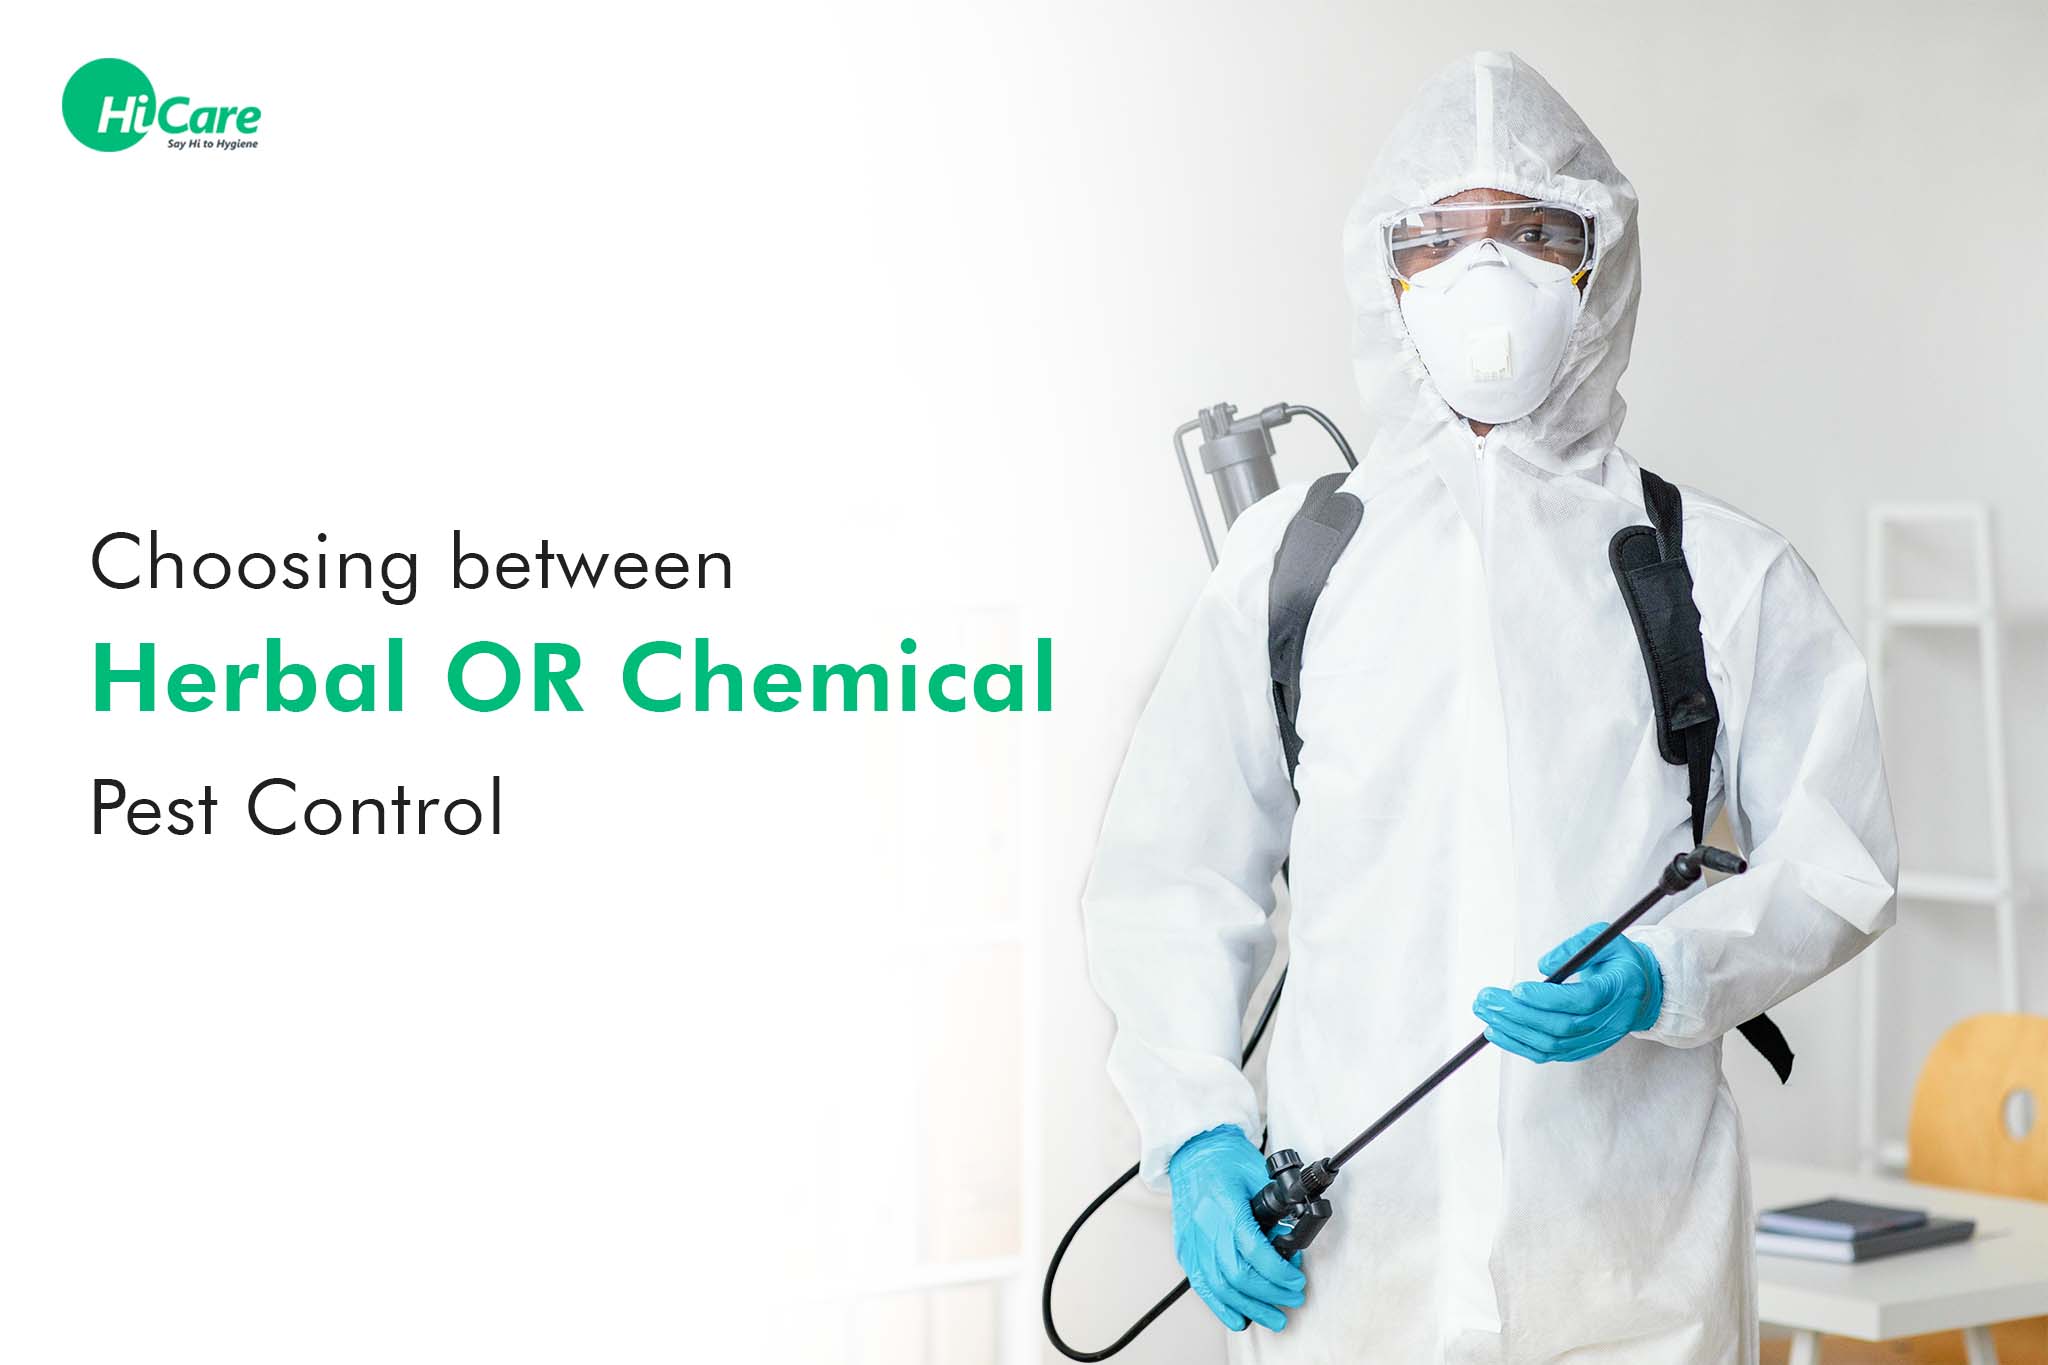 herbal or chemical pest control